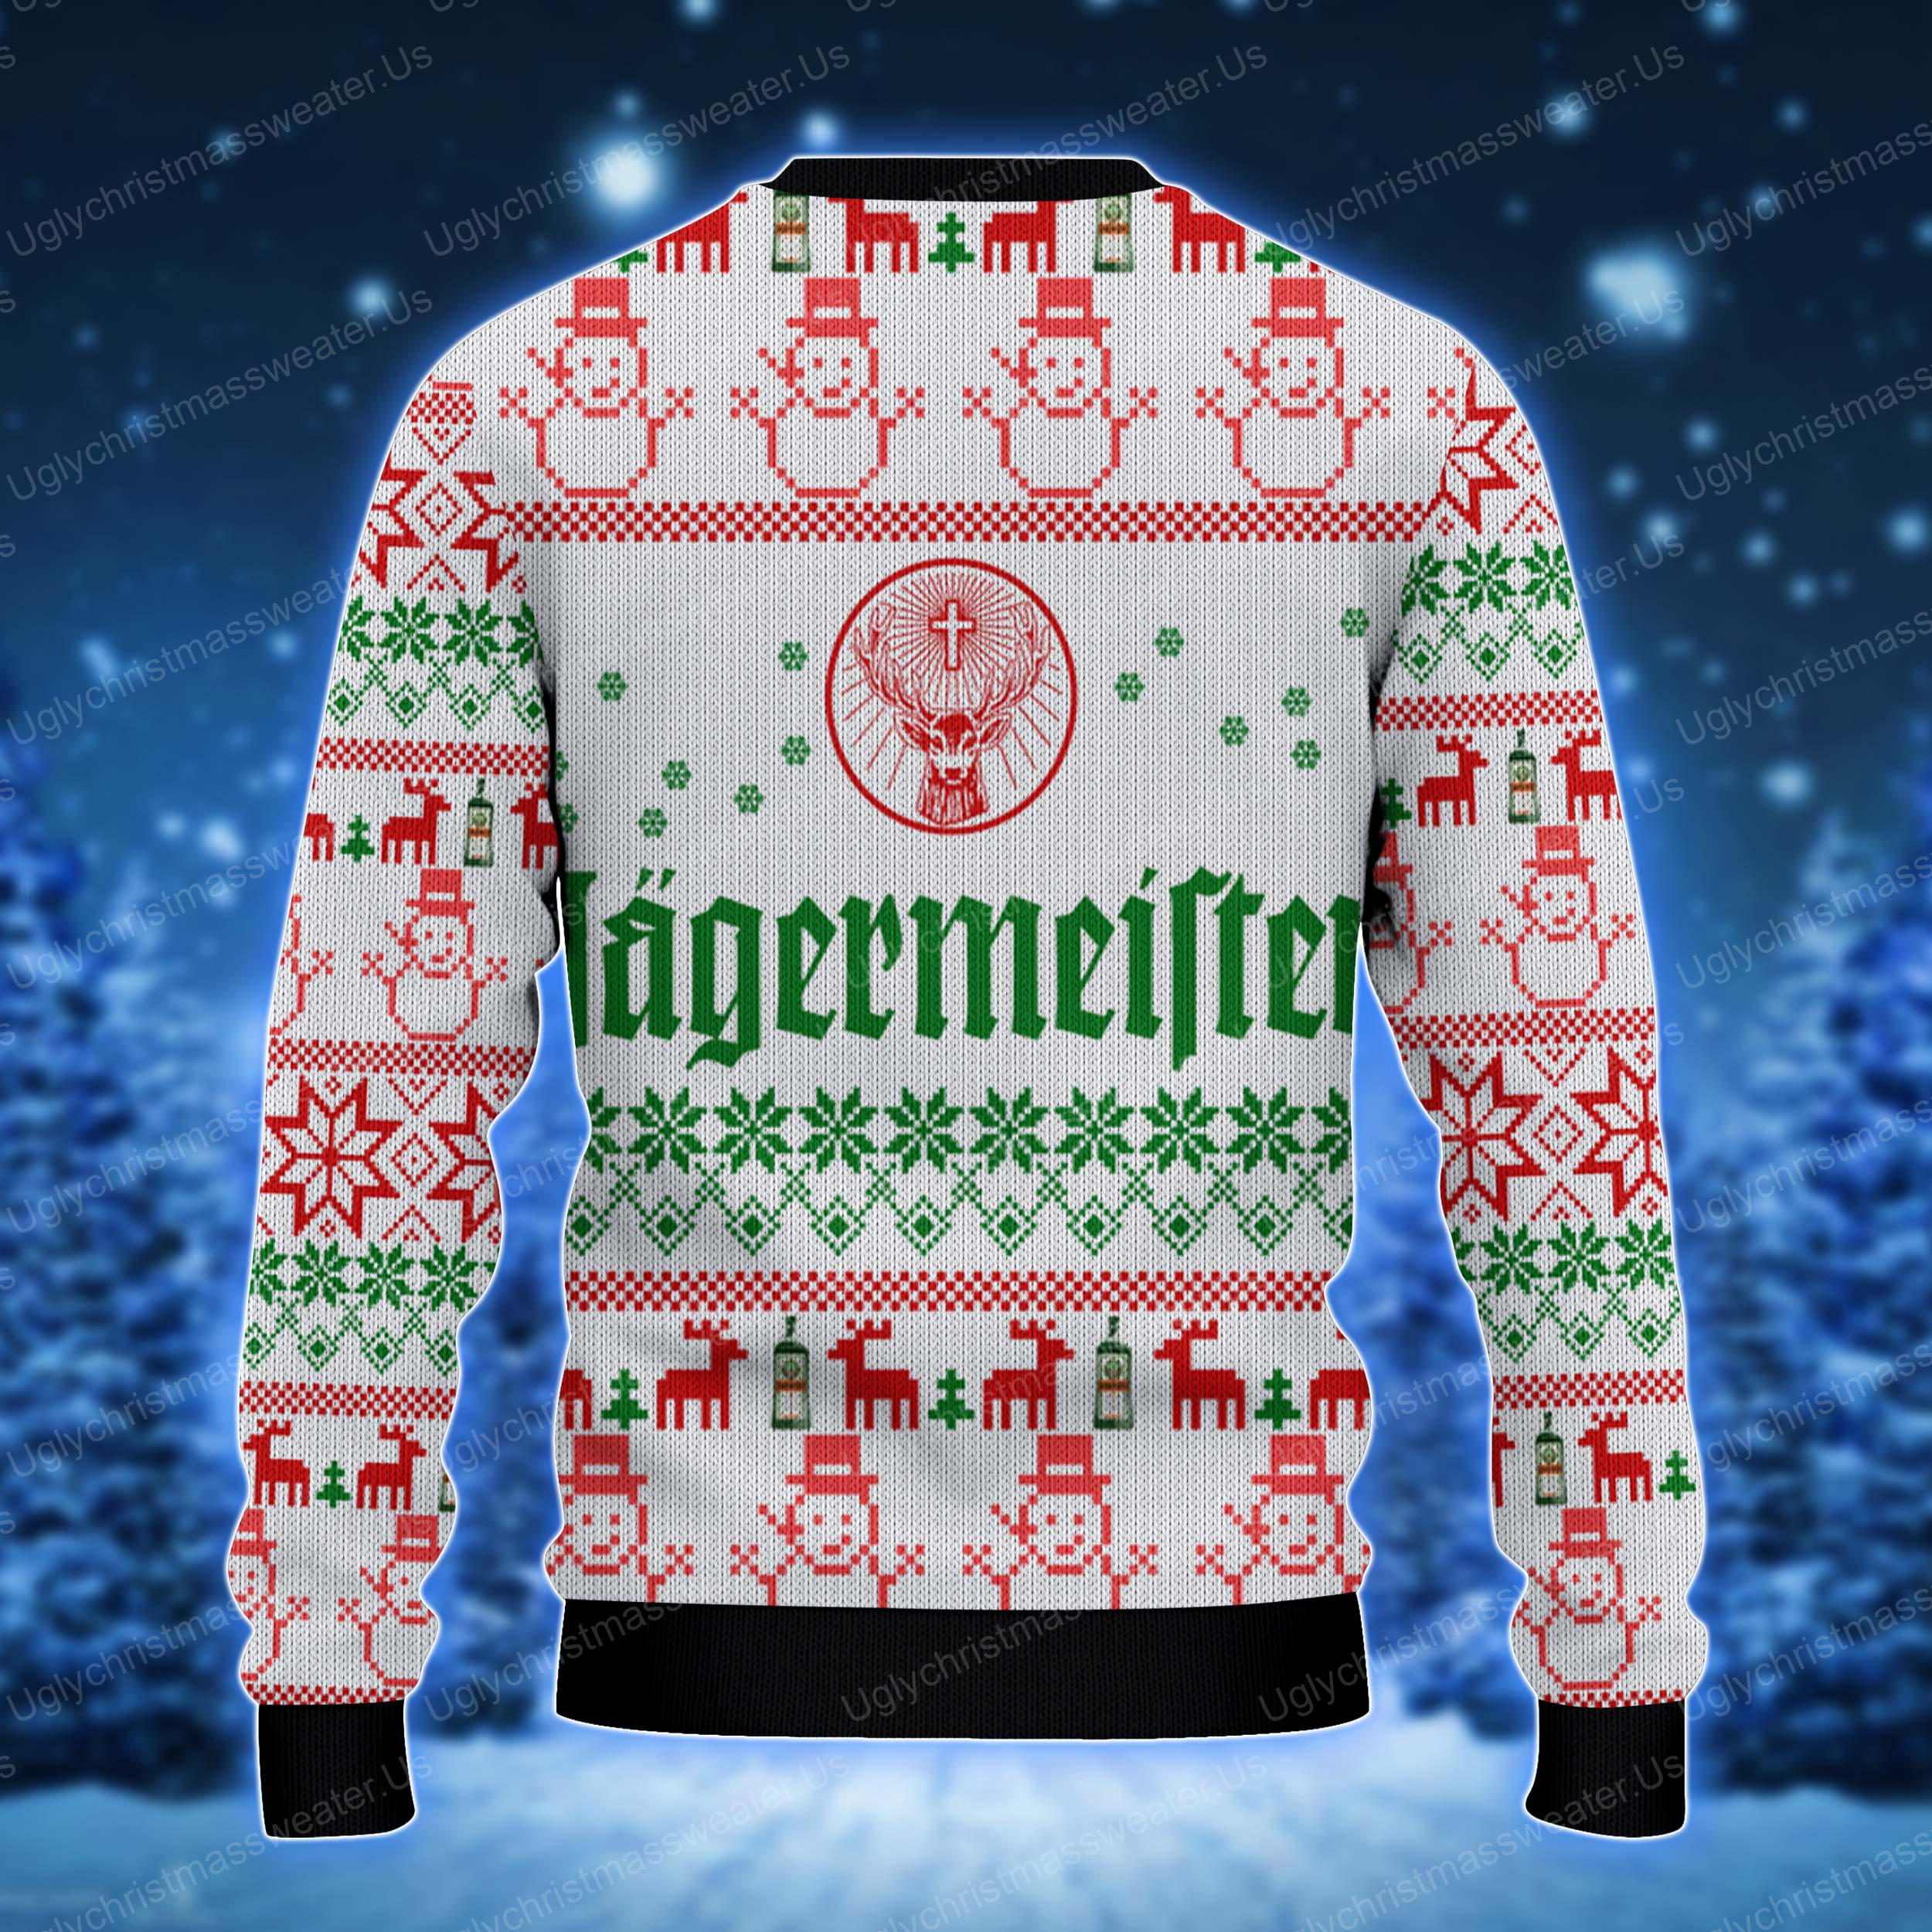 Holiday Cheer: Green, Red And Pink Ugly Sweater With Jagermeister Logo And Snowman-Snowflake